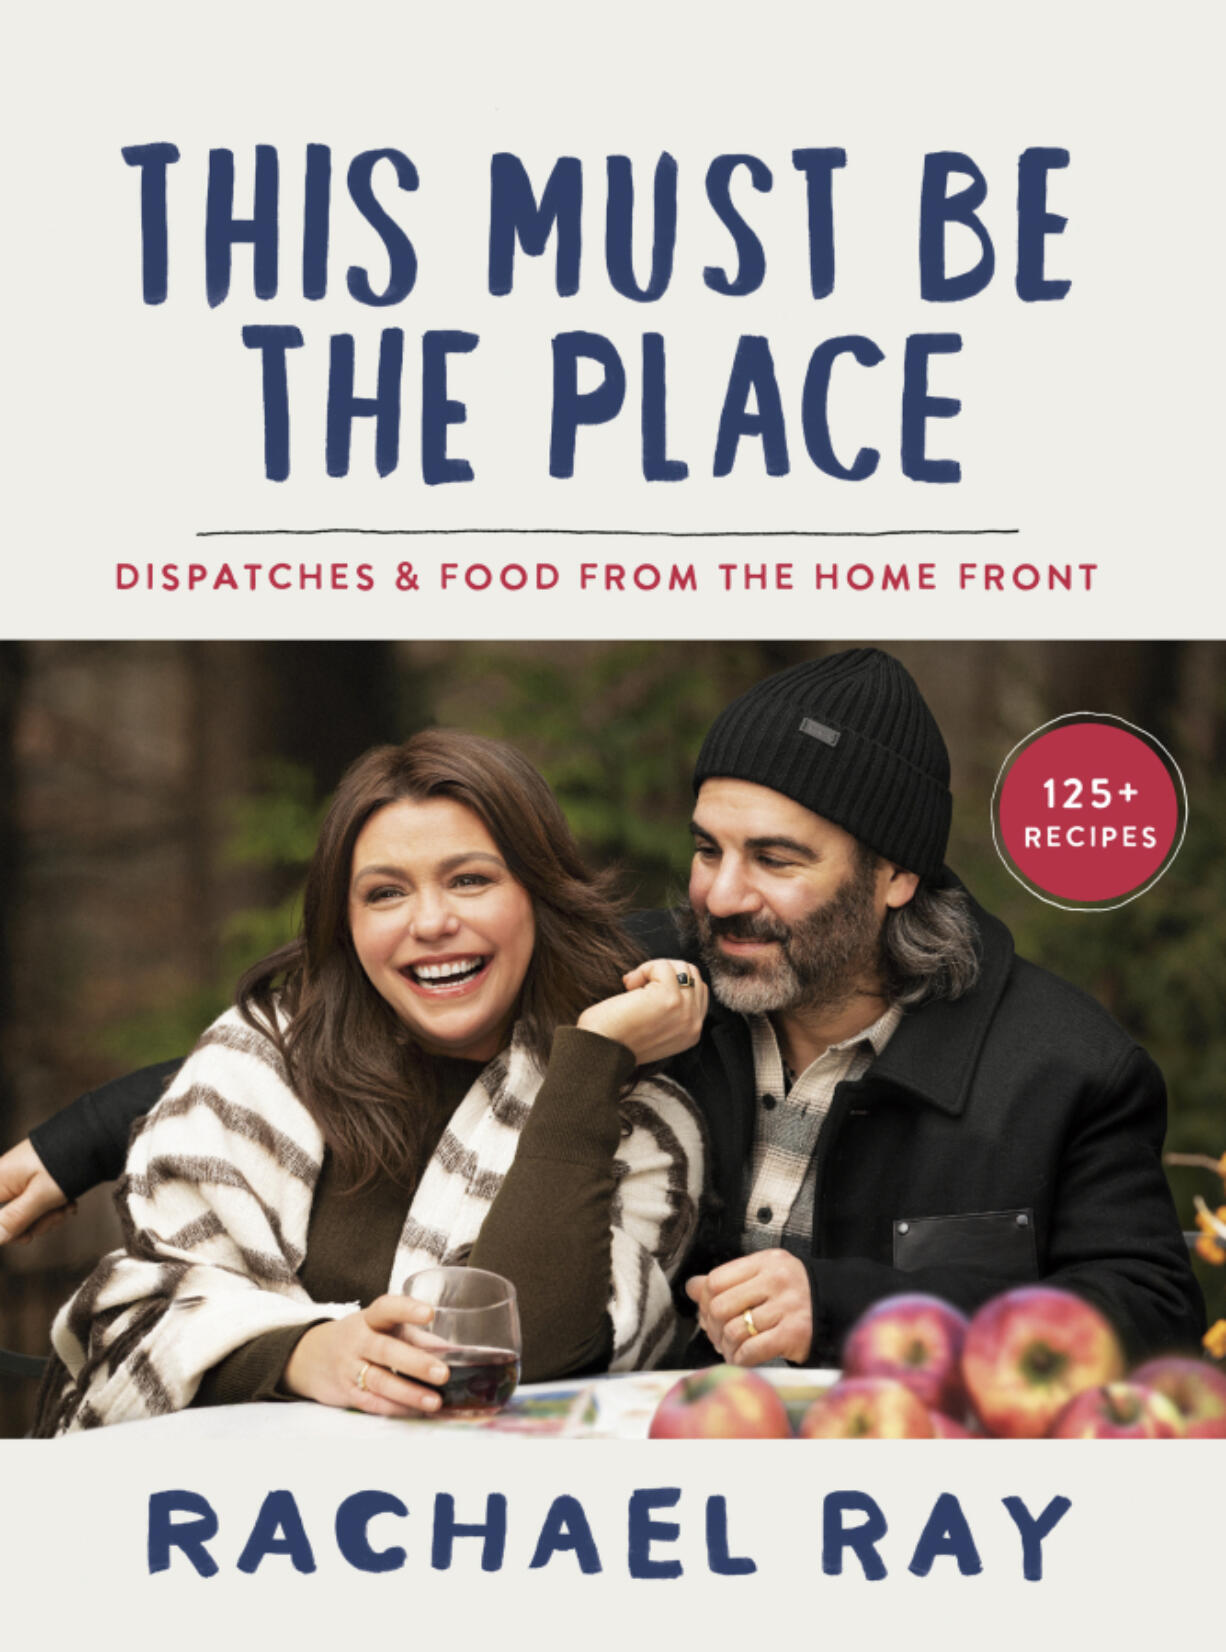 "This Must Be the Place: Dispatches & Food from the Home Front," by Rachael Ray.